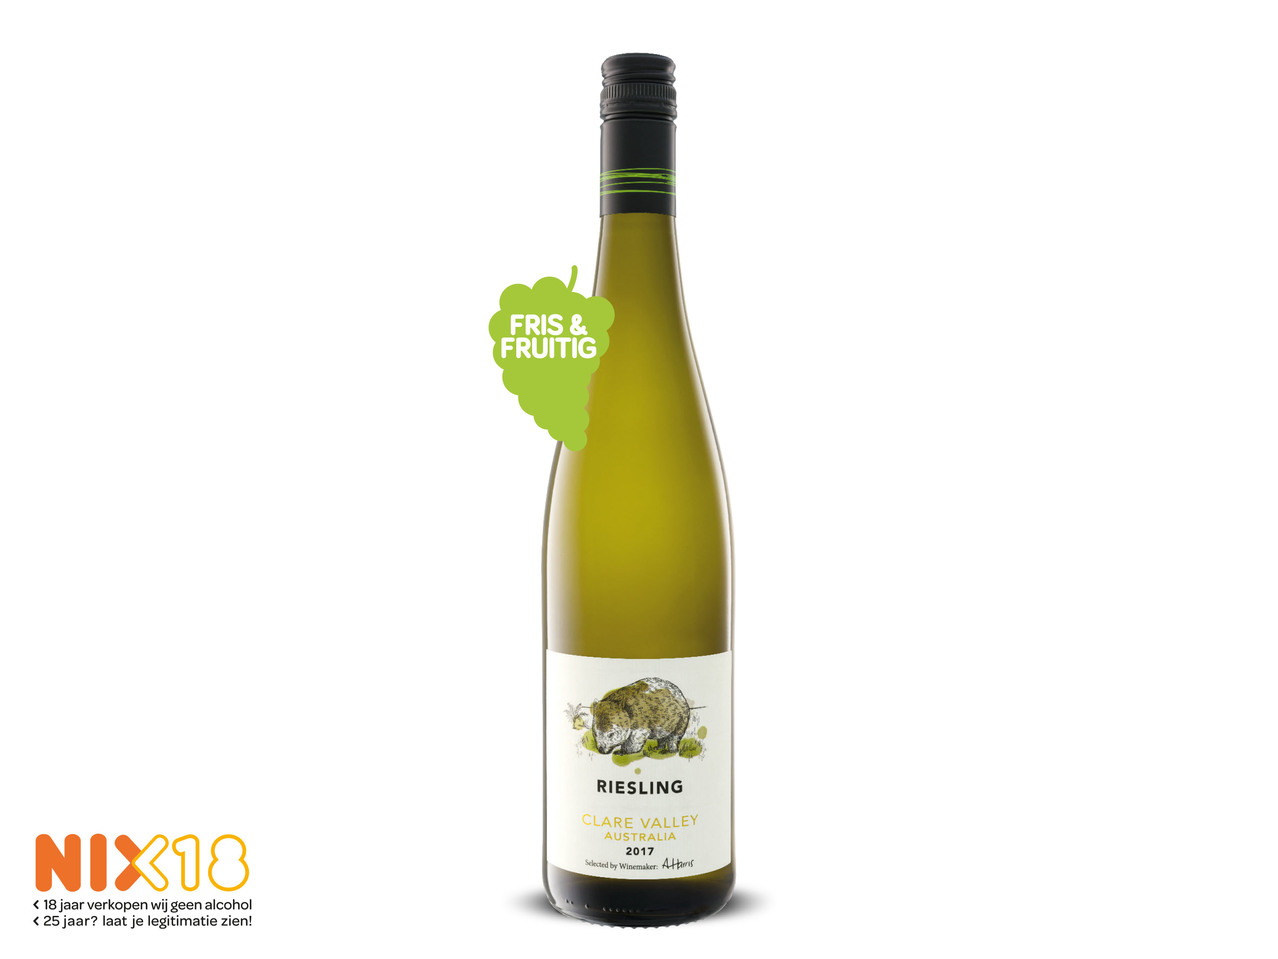 2018, Premium Riesling, Clare Valley